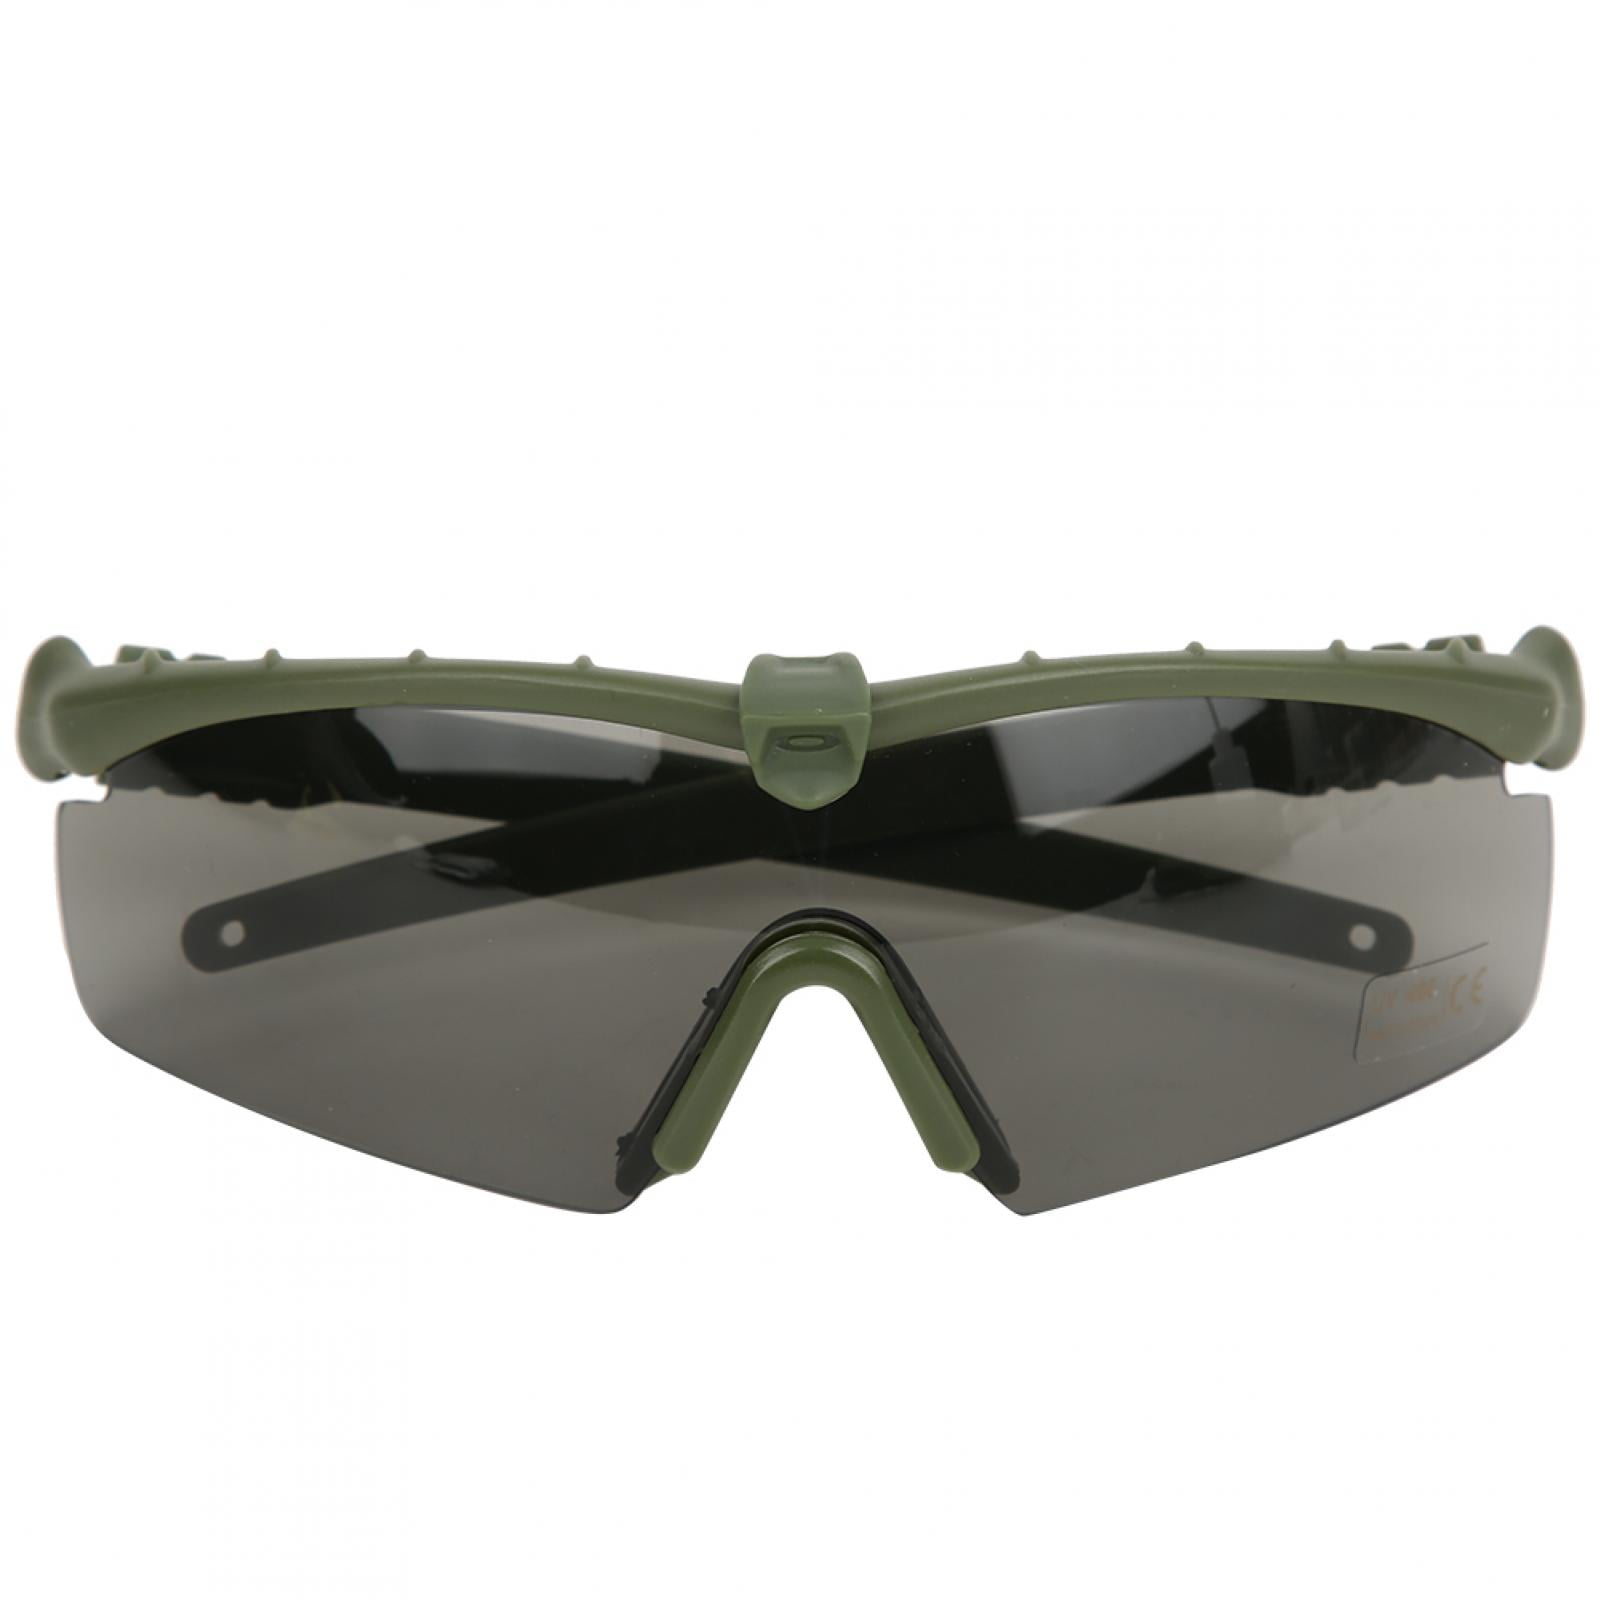 Military Shooting Goggles Protection Glasses Tactical Ballistic Set Sporting 